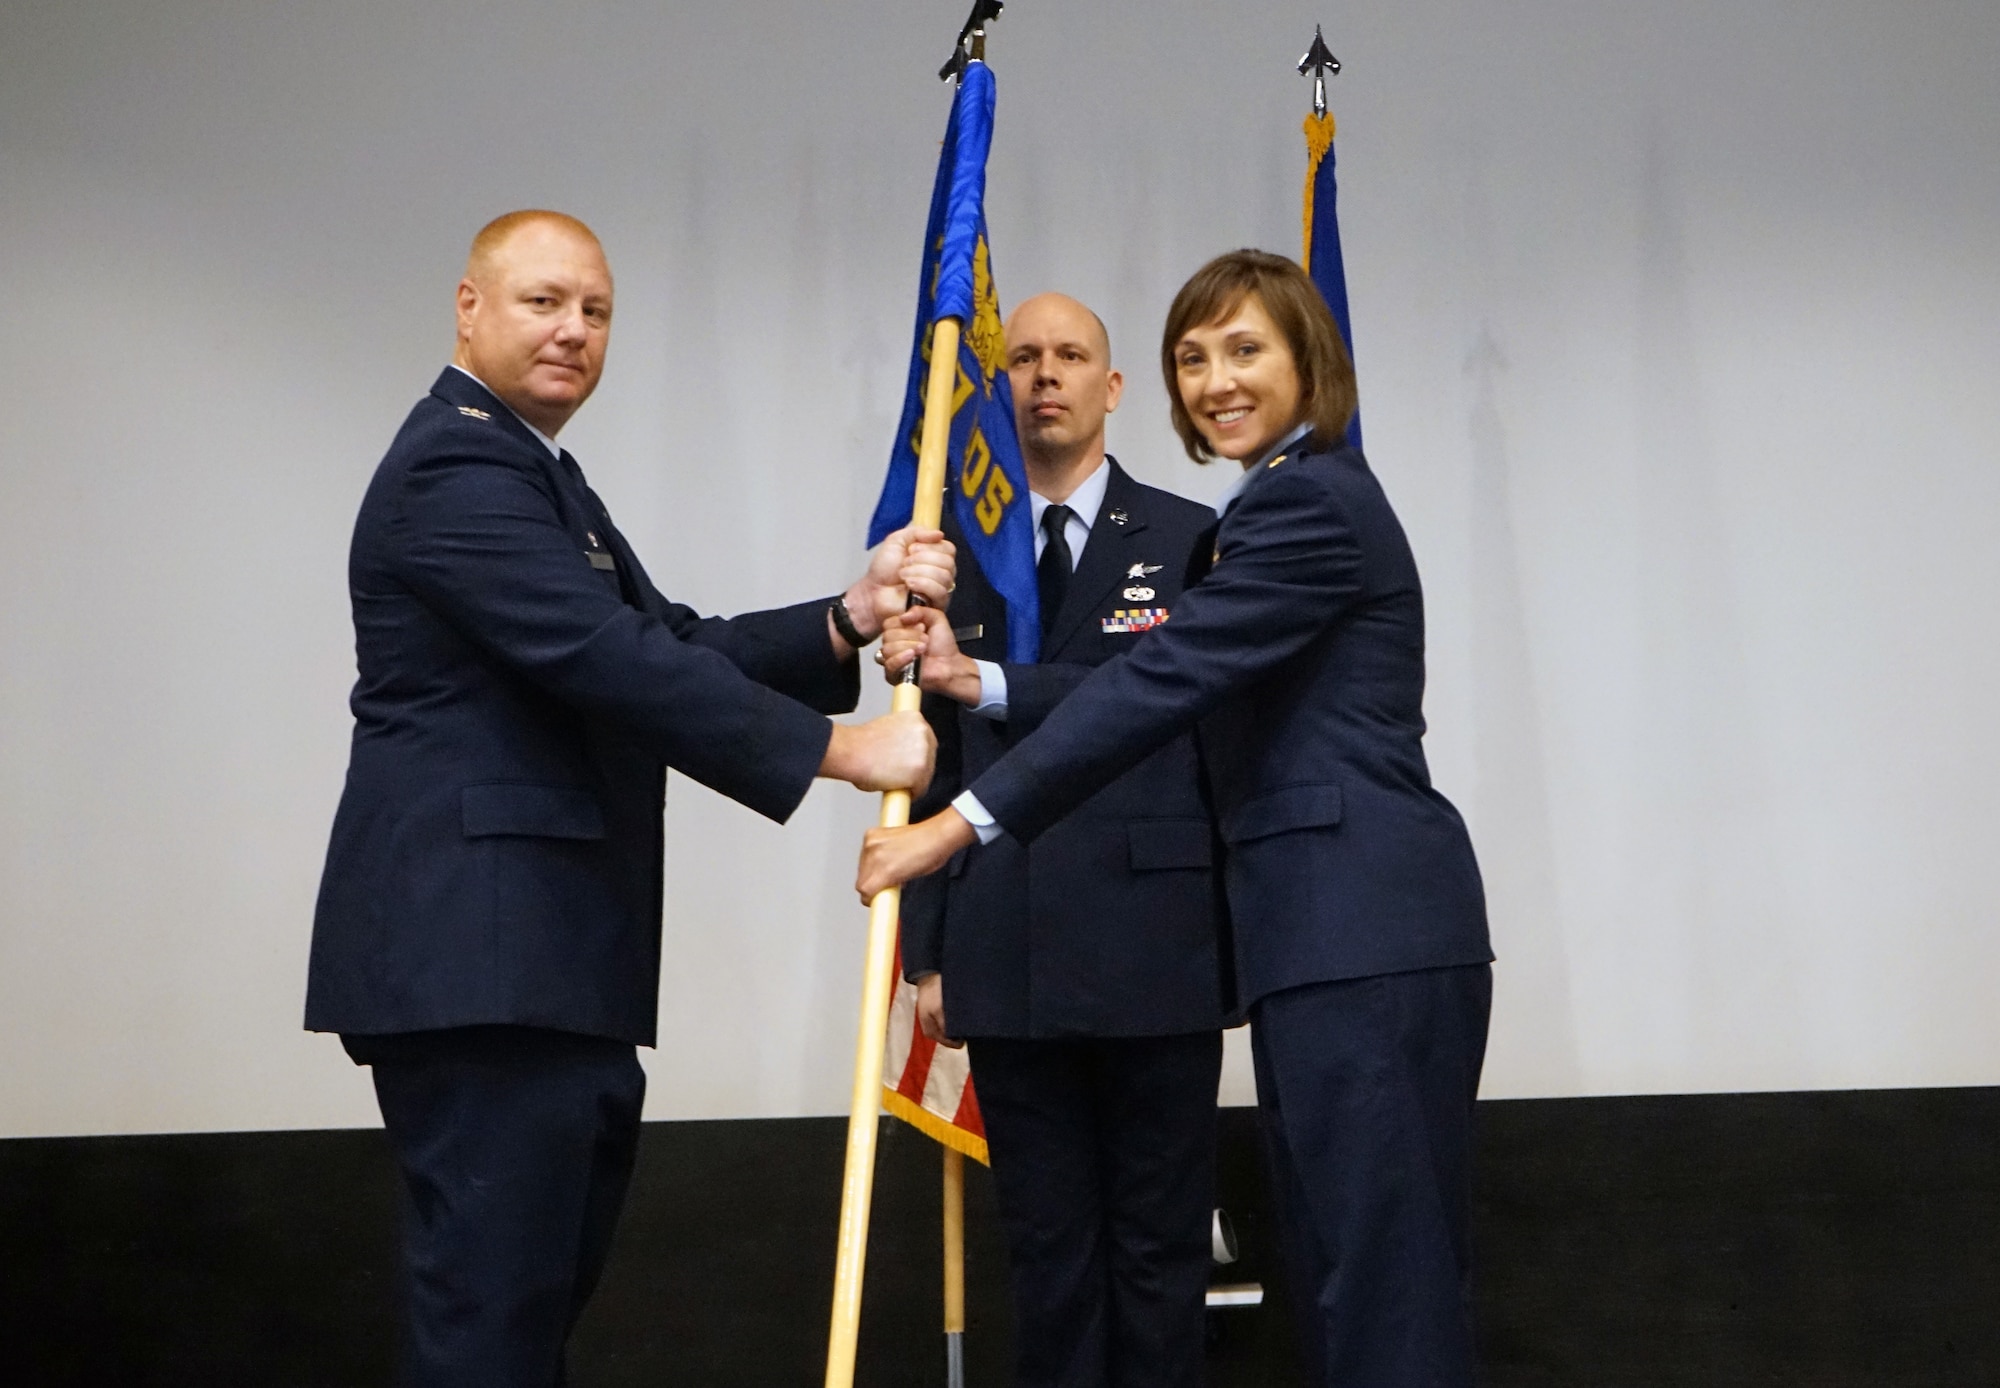 Col. Thaddeus Janicki Jr., 860th Cyberspace Operations Group commander, hands a guidon to Maj. Megan Kell, signifying her assumption of command of the 717th Information Operations Squadron during a ceremony May 15, 2022, at Hurlburt Field, Florida.